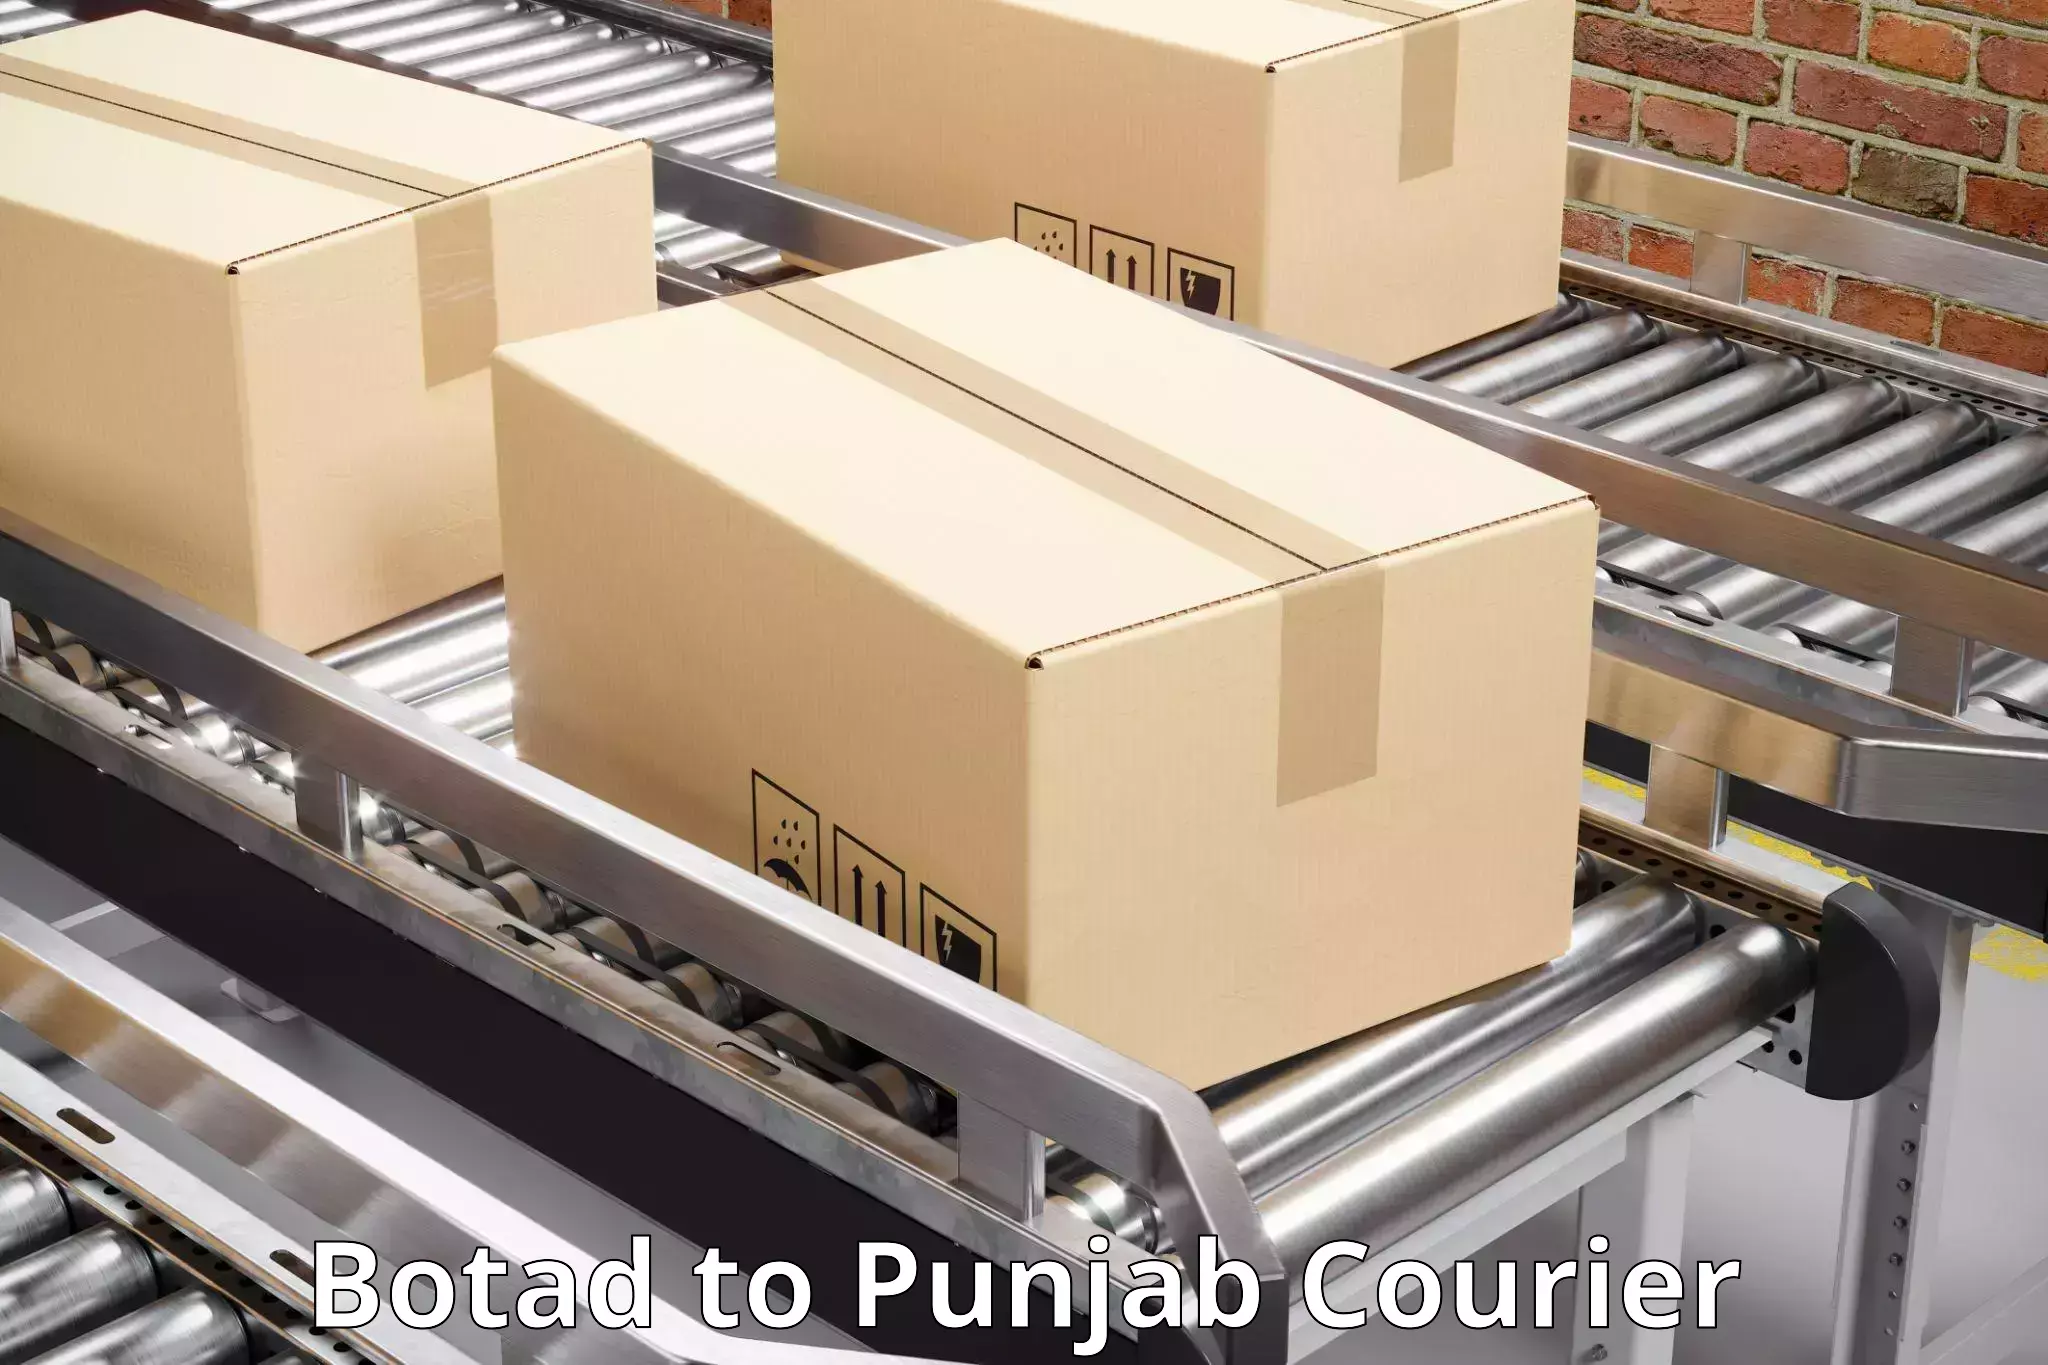 Seamless shipping experience in Botad to Jalandhar